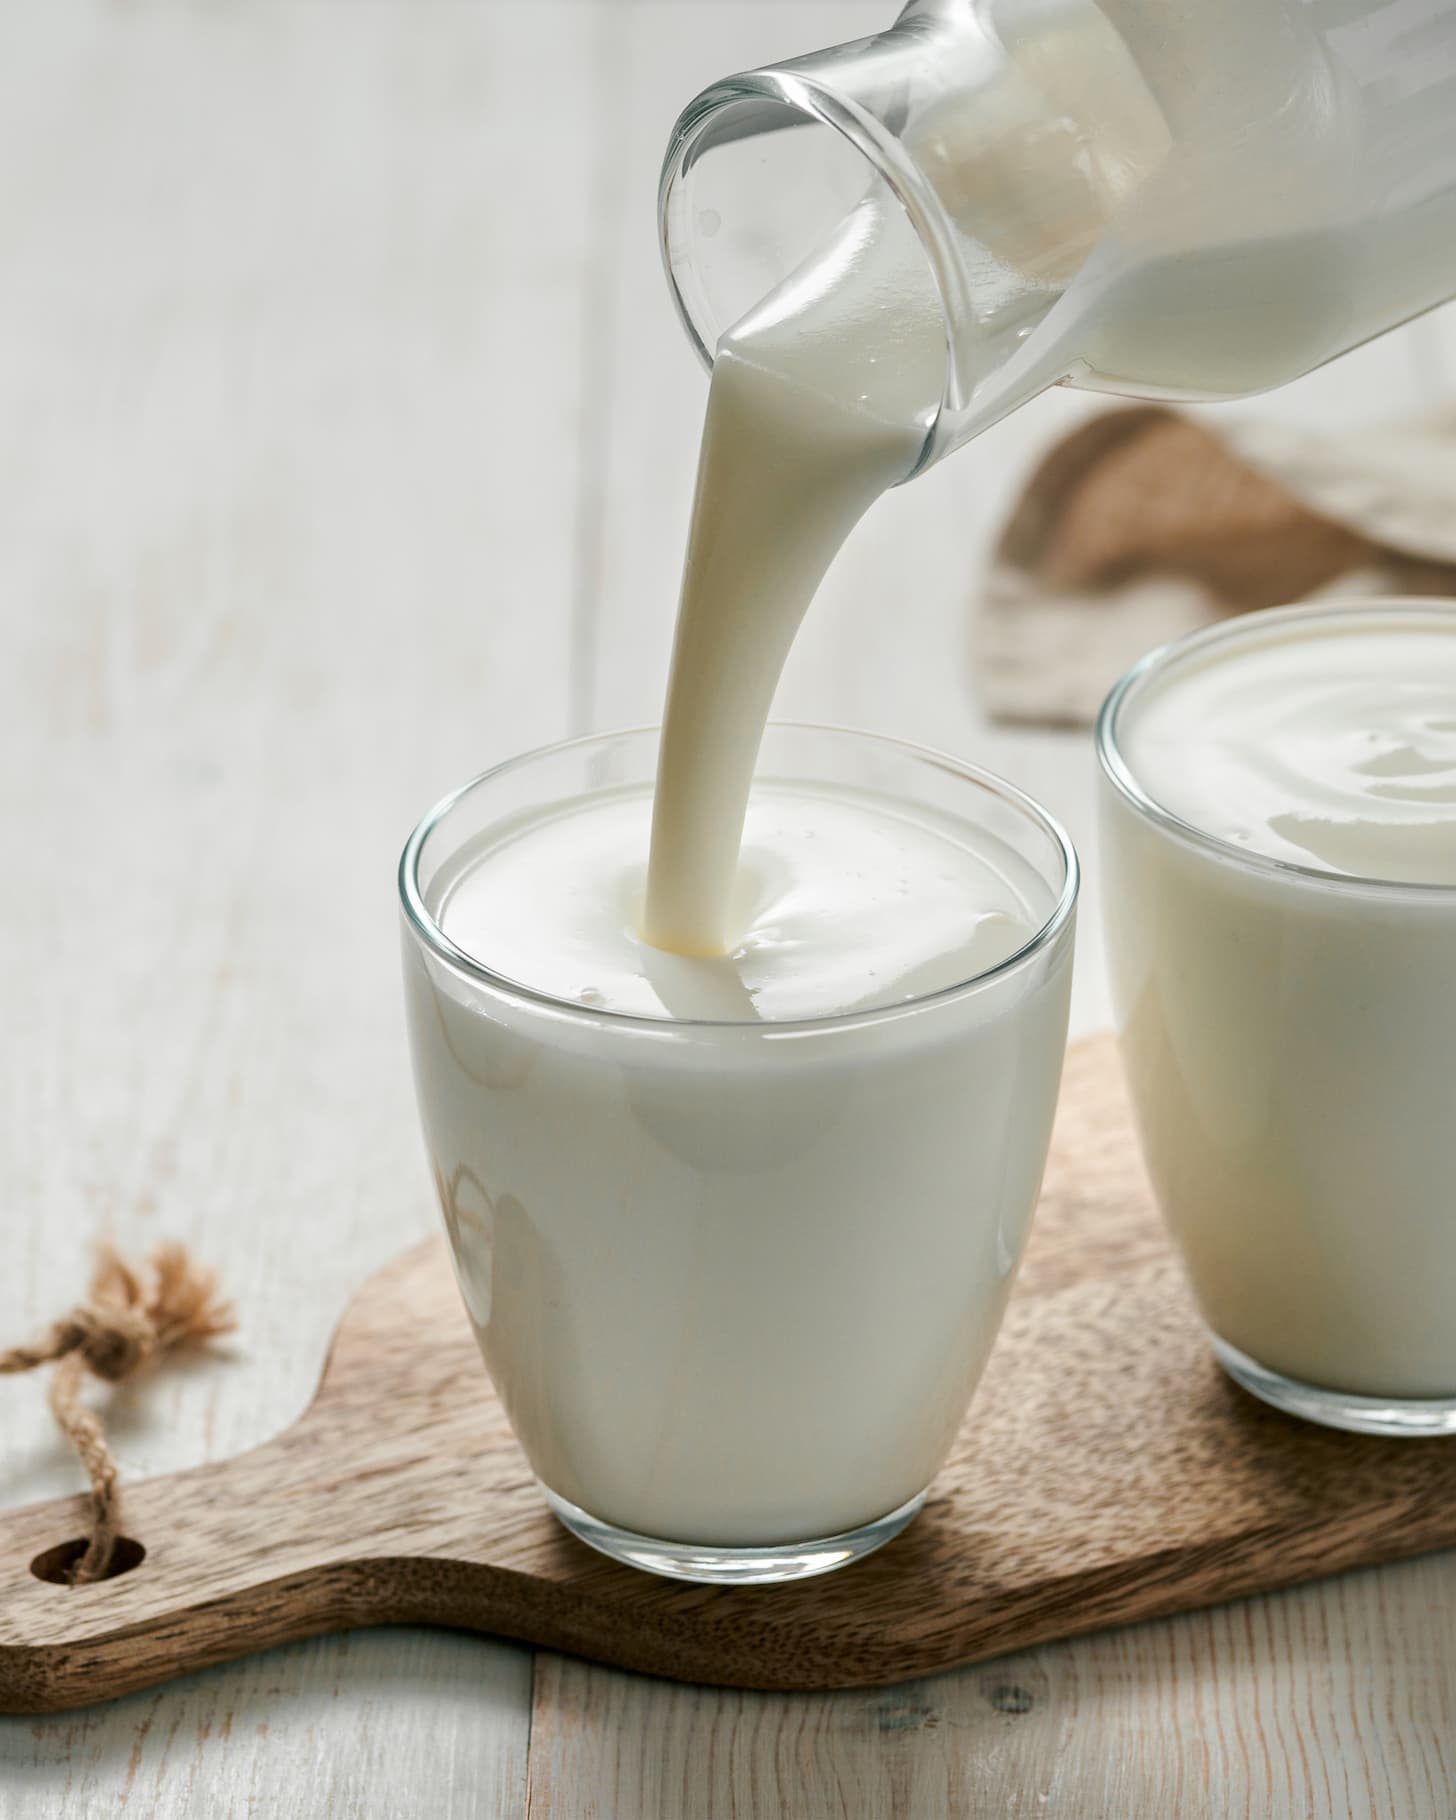 Pouring kefir, buttermilk or yogurt with probiotics. Yogurt flowing from glass bottle on white wooden background. Probiotic cold fermented dairy milk drink. Vertical